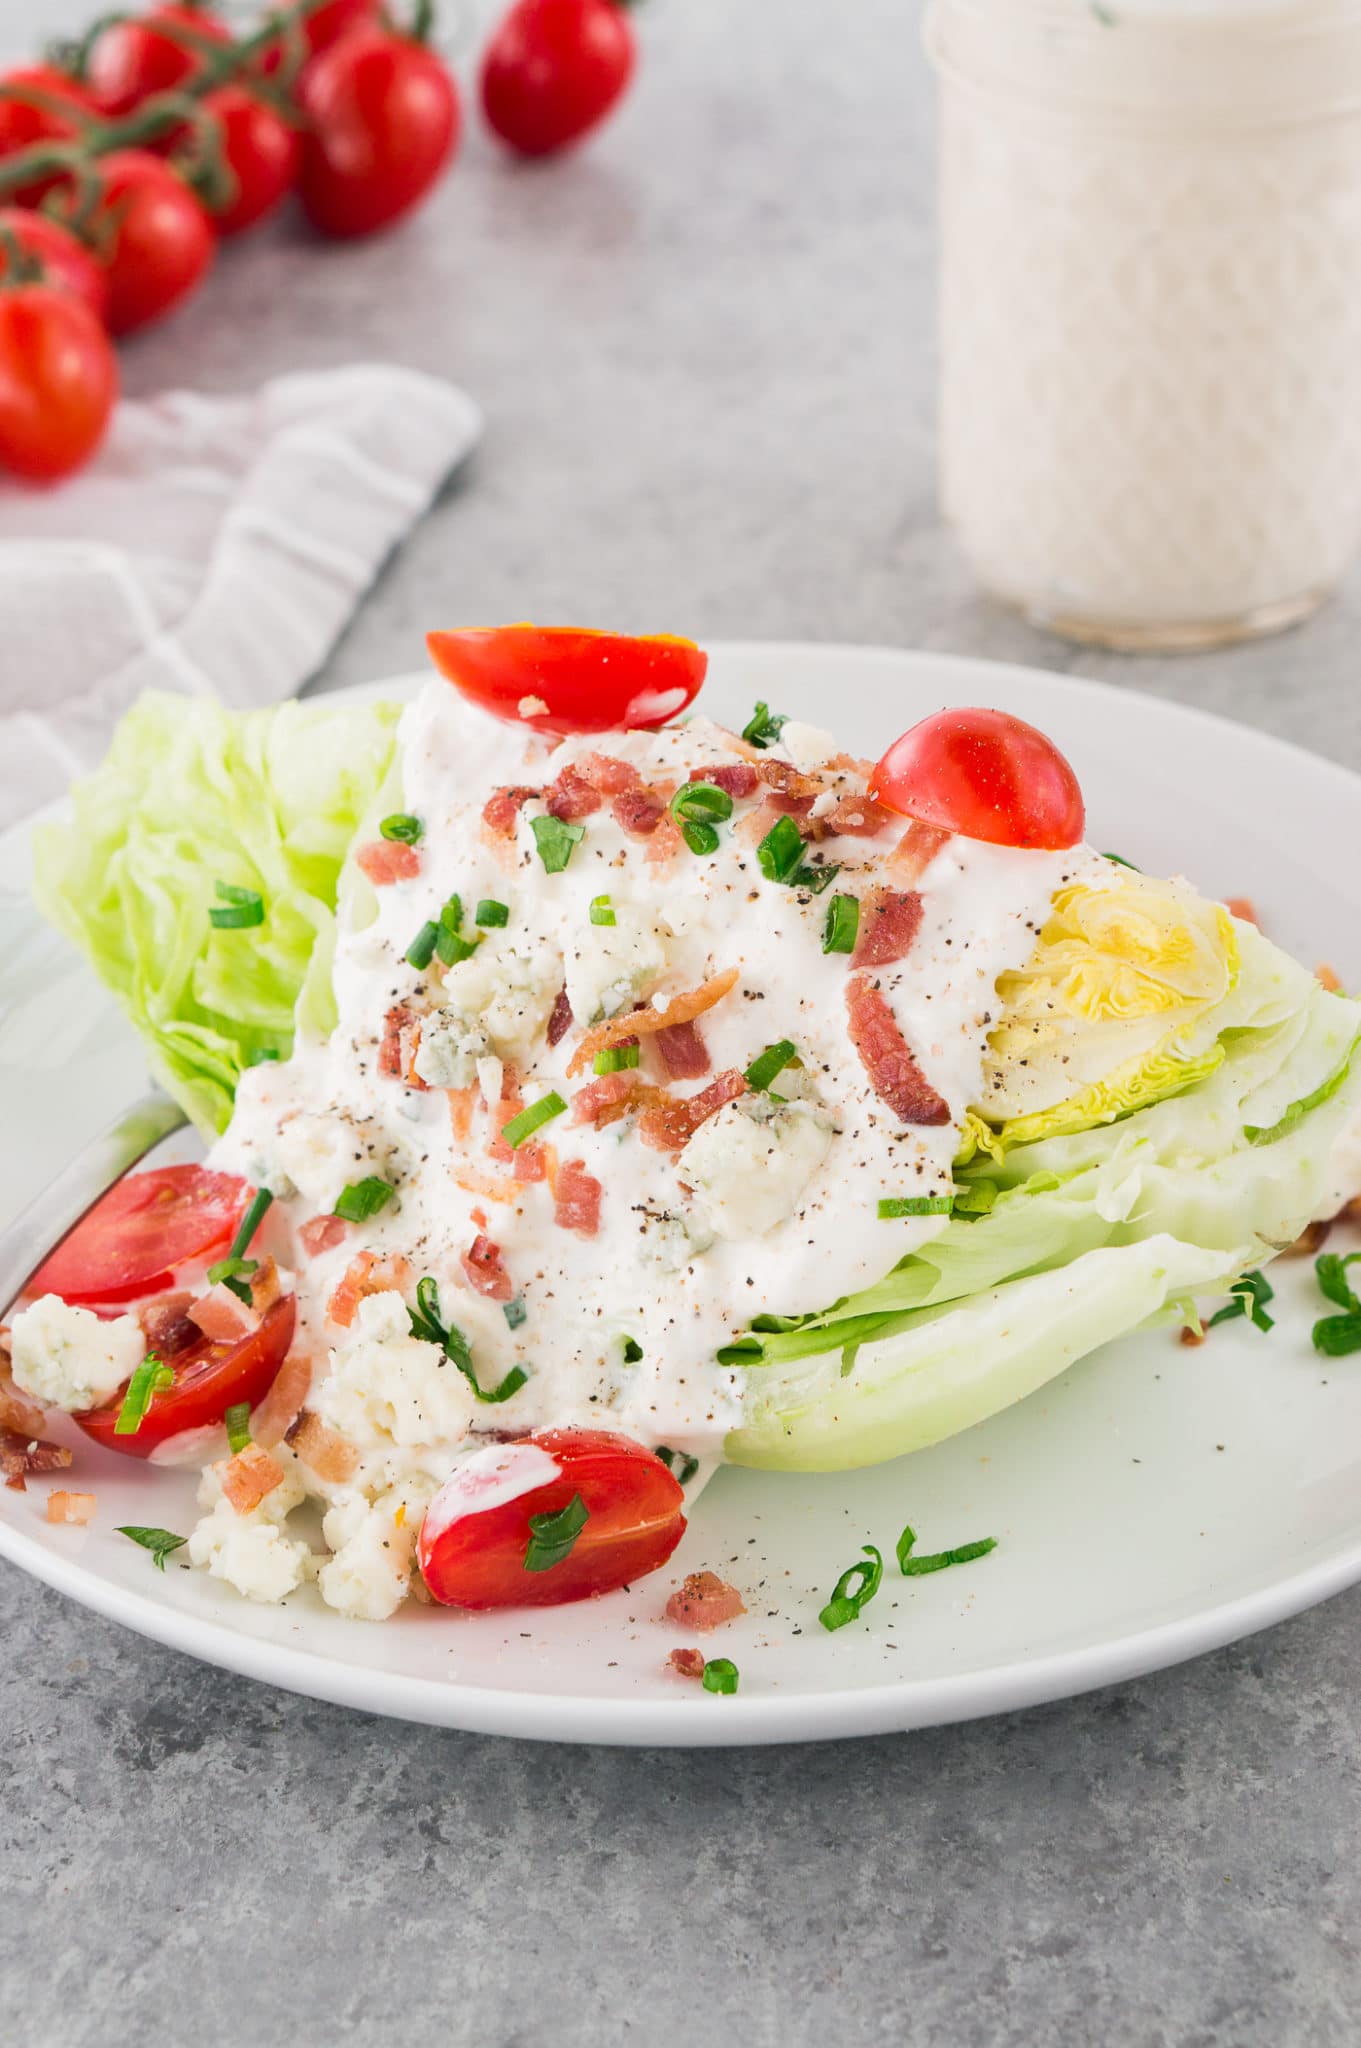 blue cheese dressing drizzled on a wedge salad